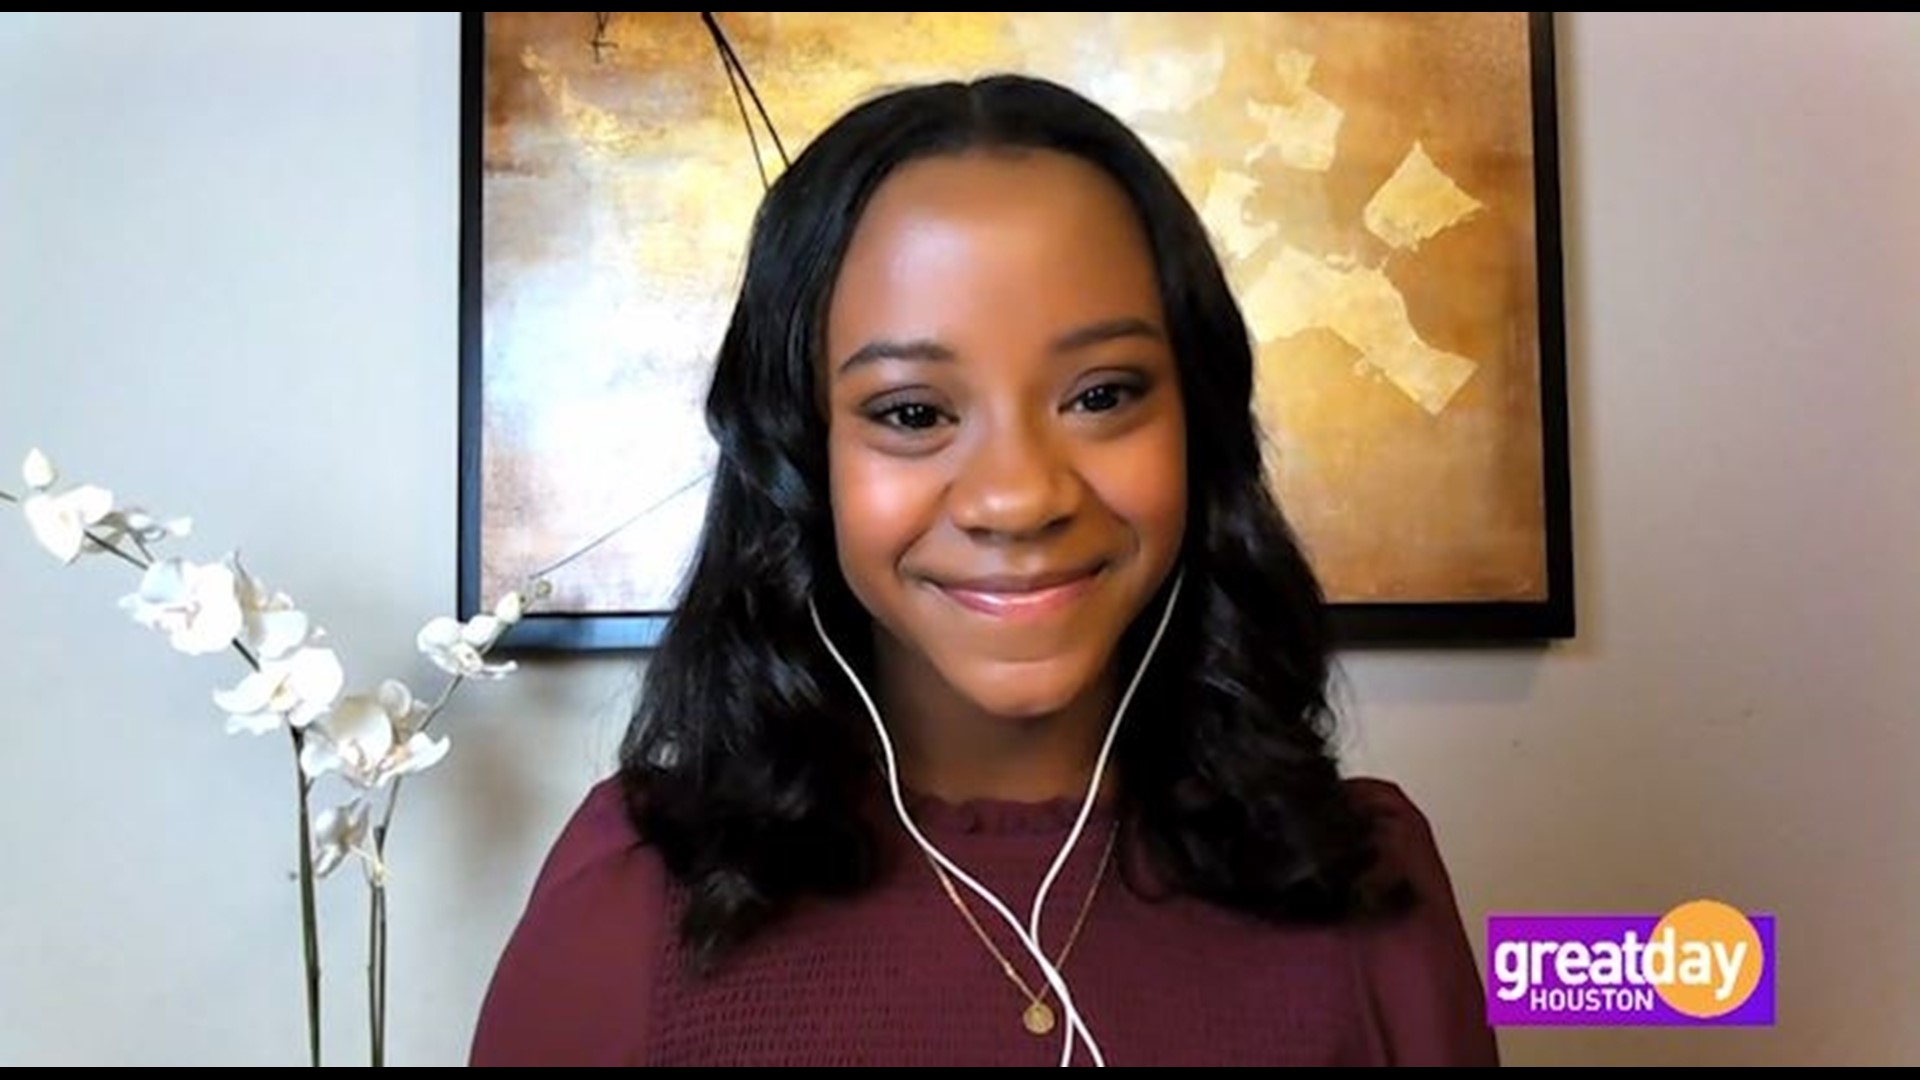 The local 15-year-old plays Tiffany in the highly anticipated Prime Video series. Great Day Houston speaks with the actress & learns more about her & the new series